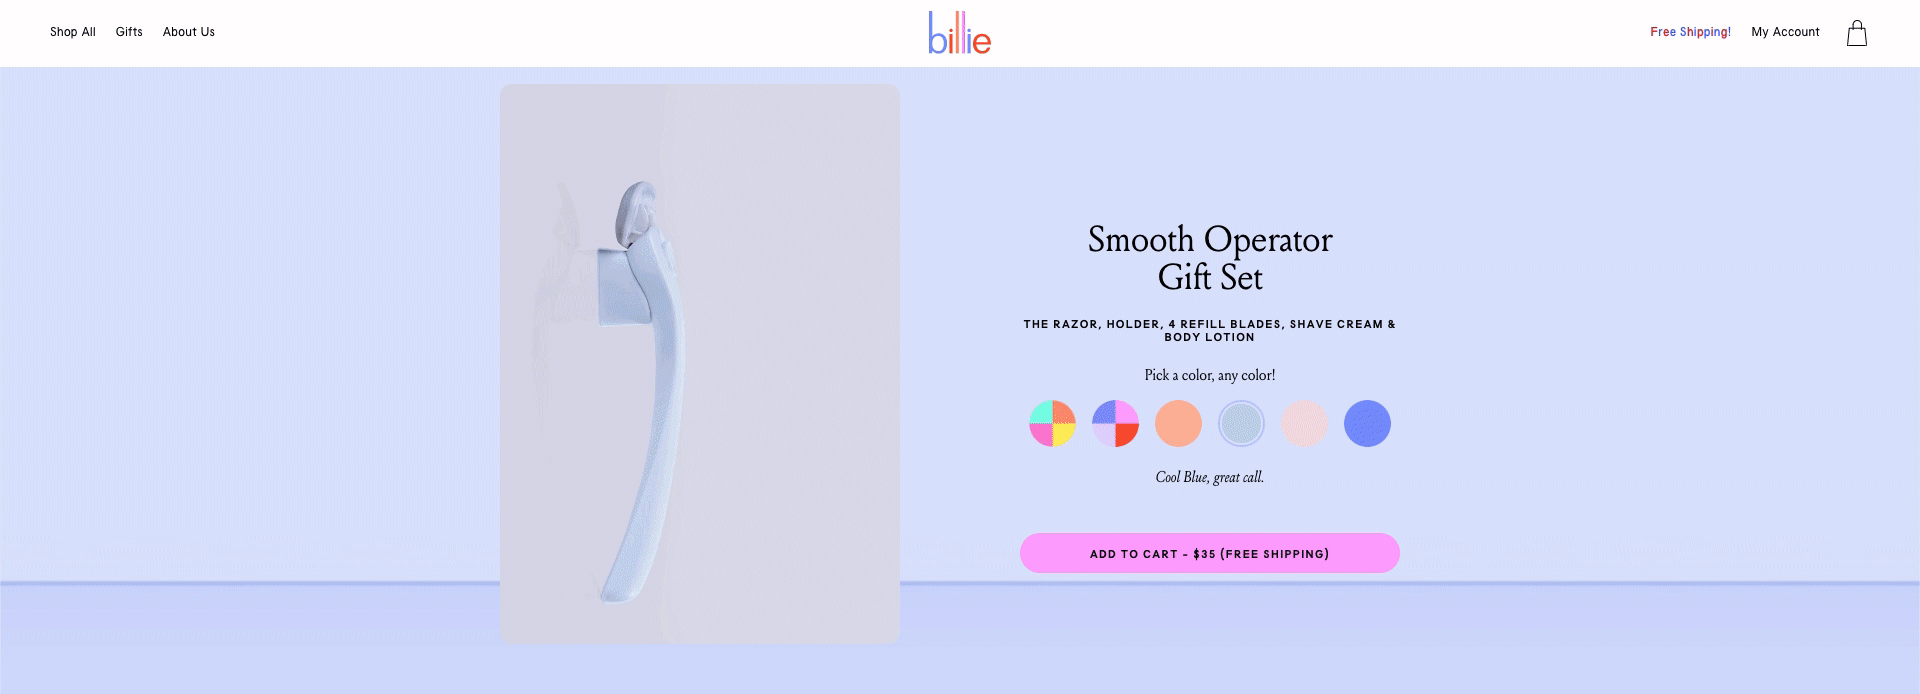 Billie Product Page 5